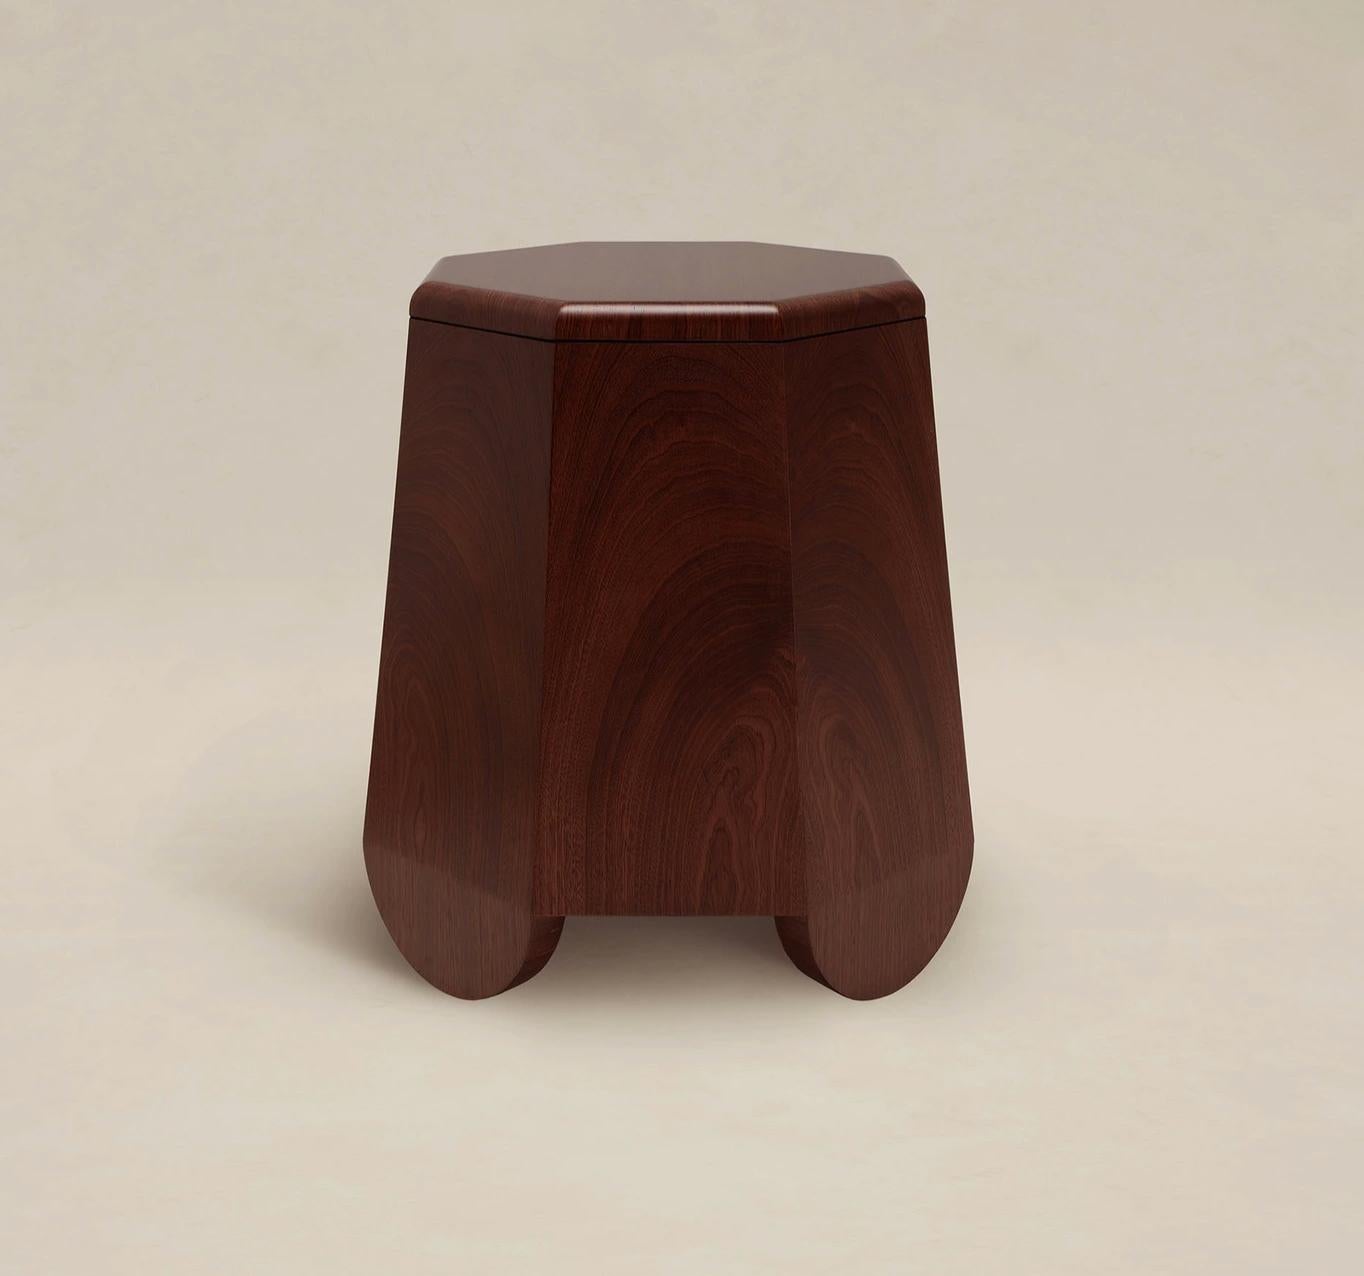 Chatior Side Table by Aède Studios
Dimensions: D 44 x W 44 x H 50 cm. 
Materials: Figured mahogany. 

Available in figured mahogany or oak. Custom materials are available on demand. Please contact us. 

Aède is an interdisciplinary design studio